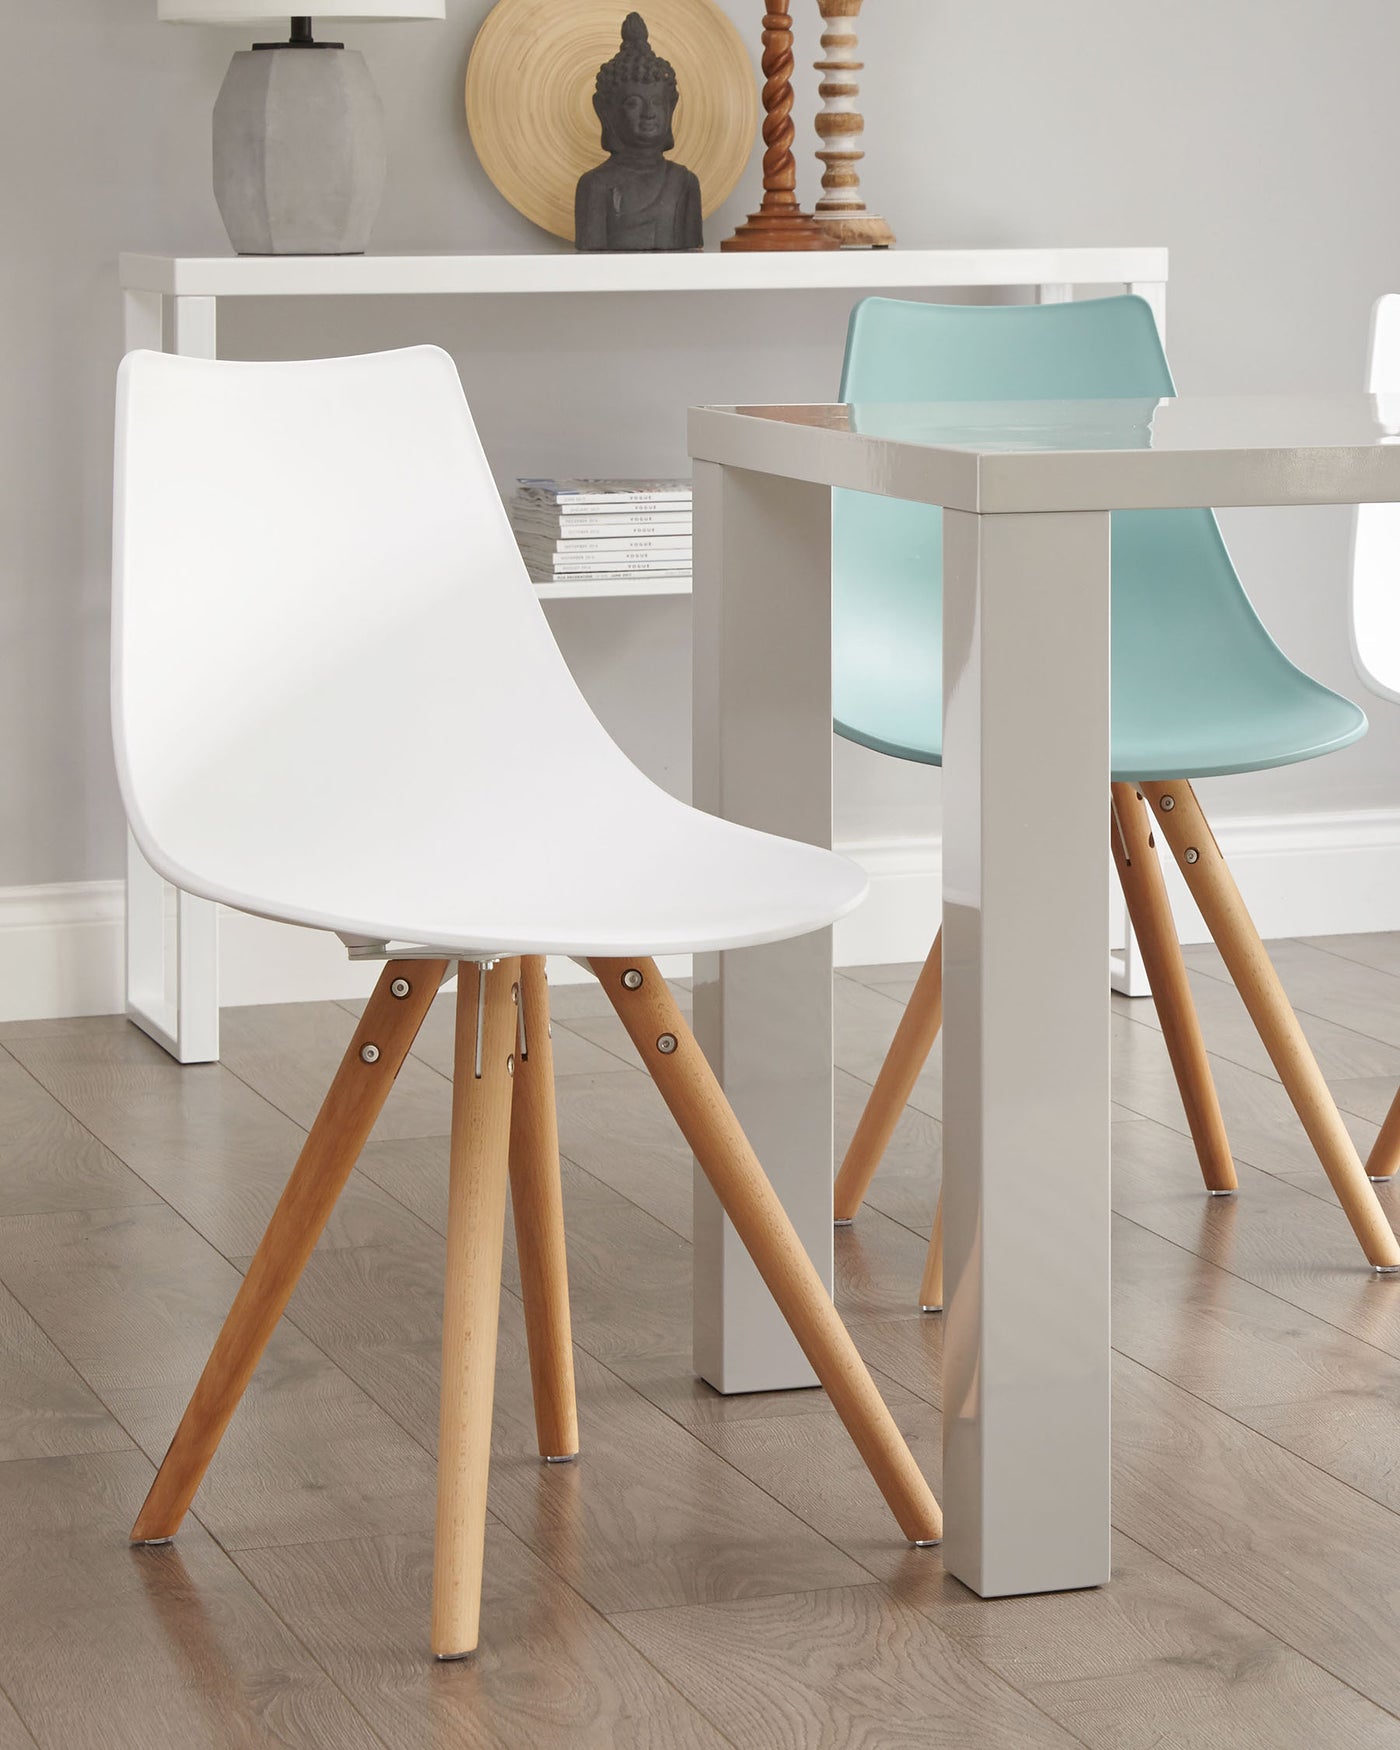 Modern dining room furniture featuring a white square table with sleek grey legs, paired with two minimalist chairs – one white and one turquoise – with smooth plastic seats and angled wooden legs connected by metal brackets. The setting displays a clean, contemporary aesthetic.